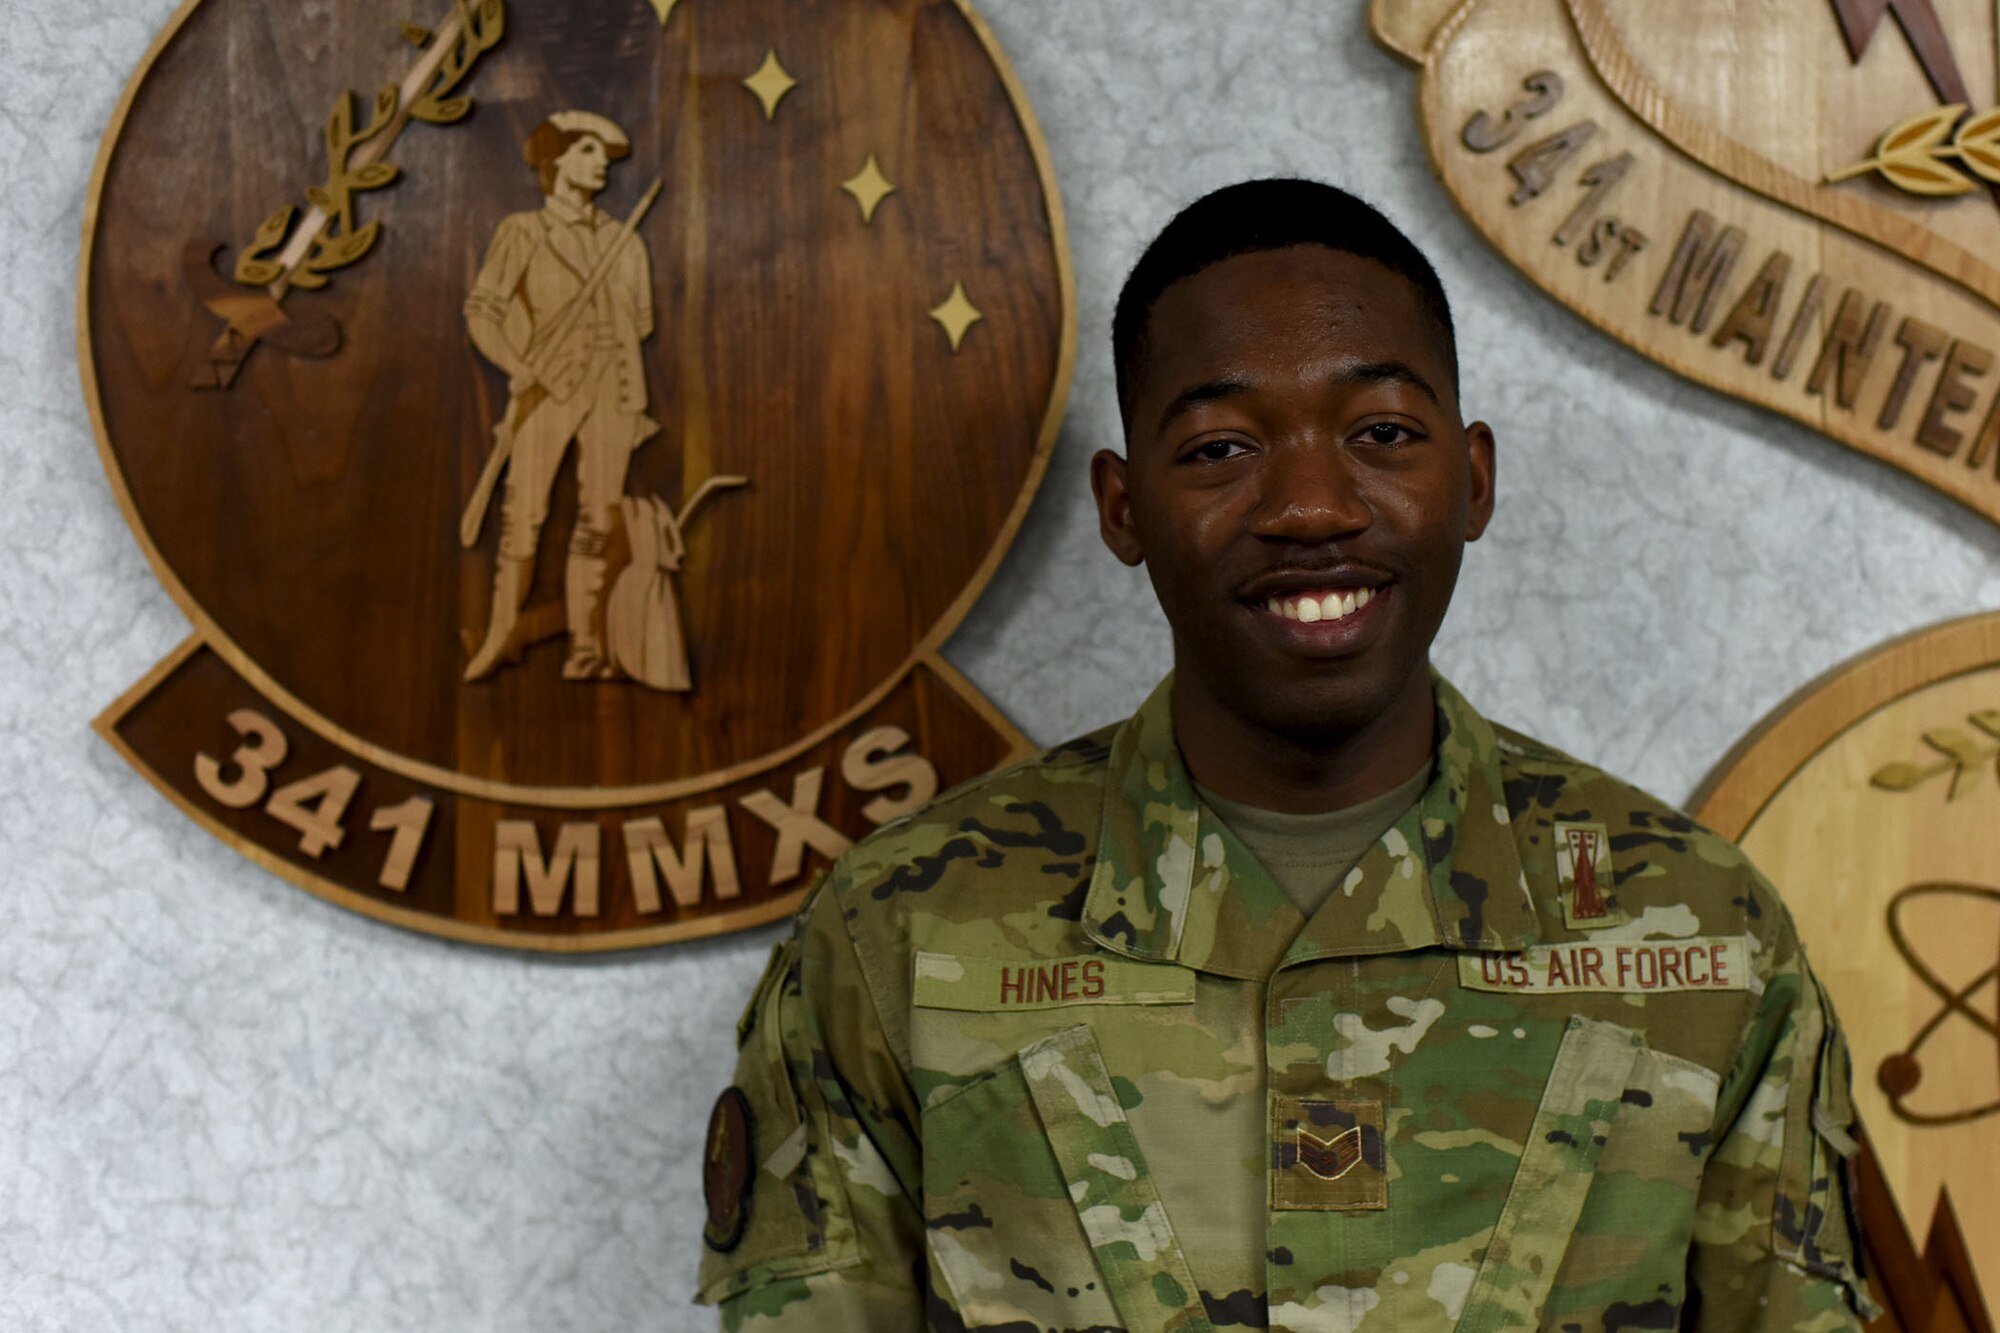 Staff Sgt. Khalif Hines stands in front of a maintenance squadron emblem and looks directly at the camera as he smiles for the photo.